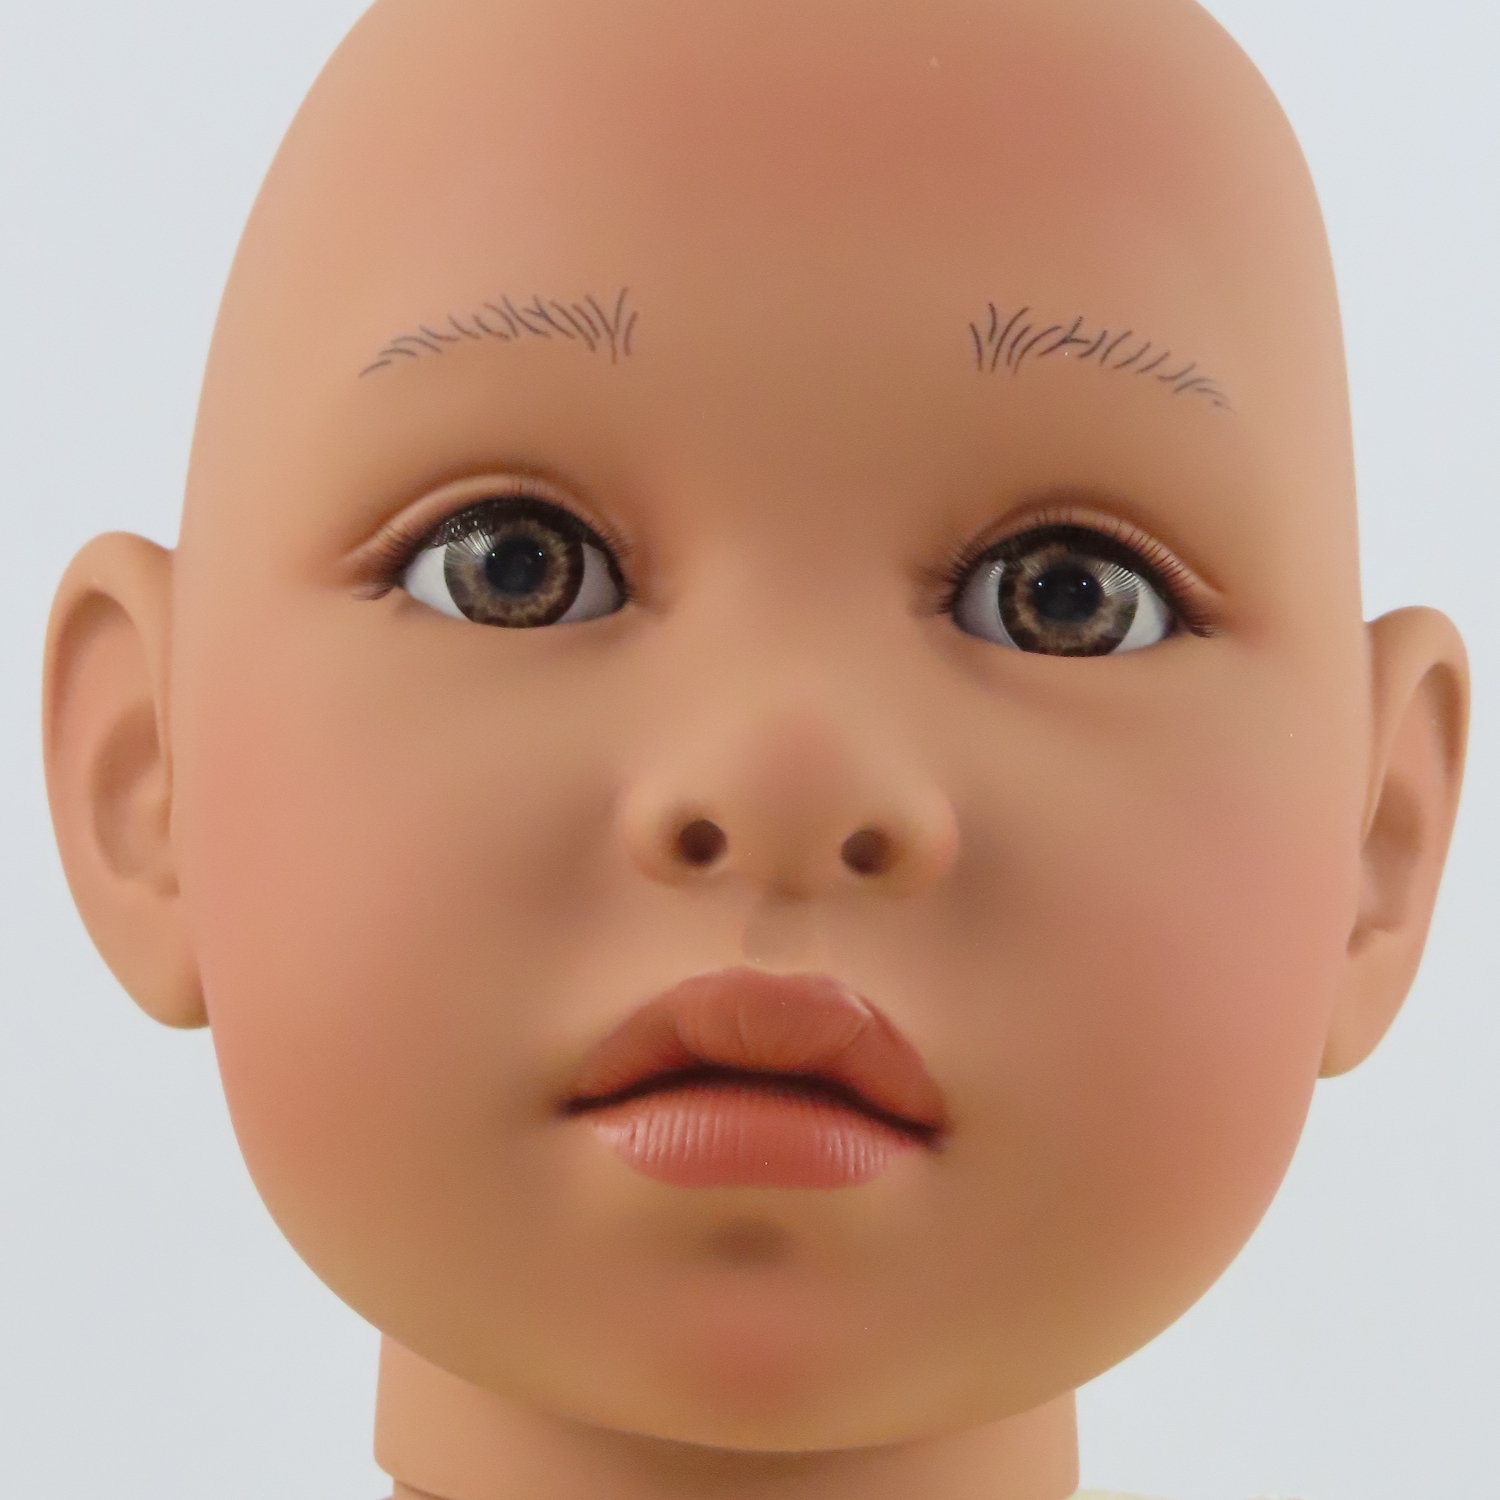 Lupe Doll Kit for Creating Toddler and Baby Dolls That Look Real